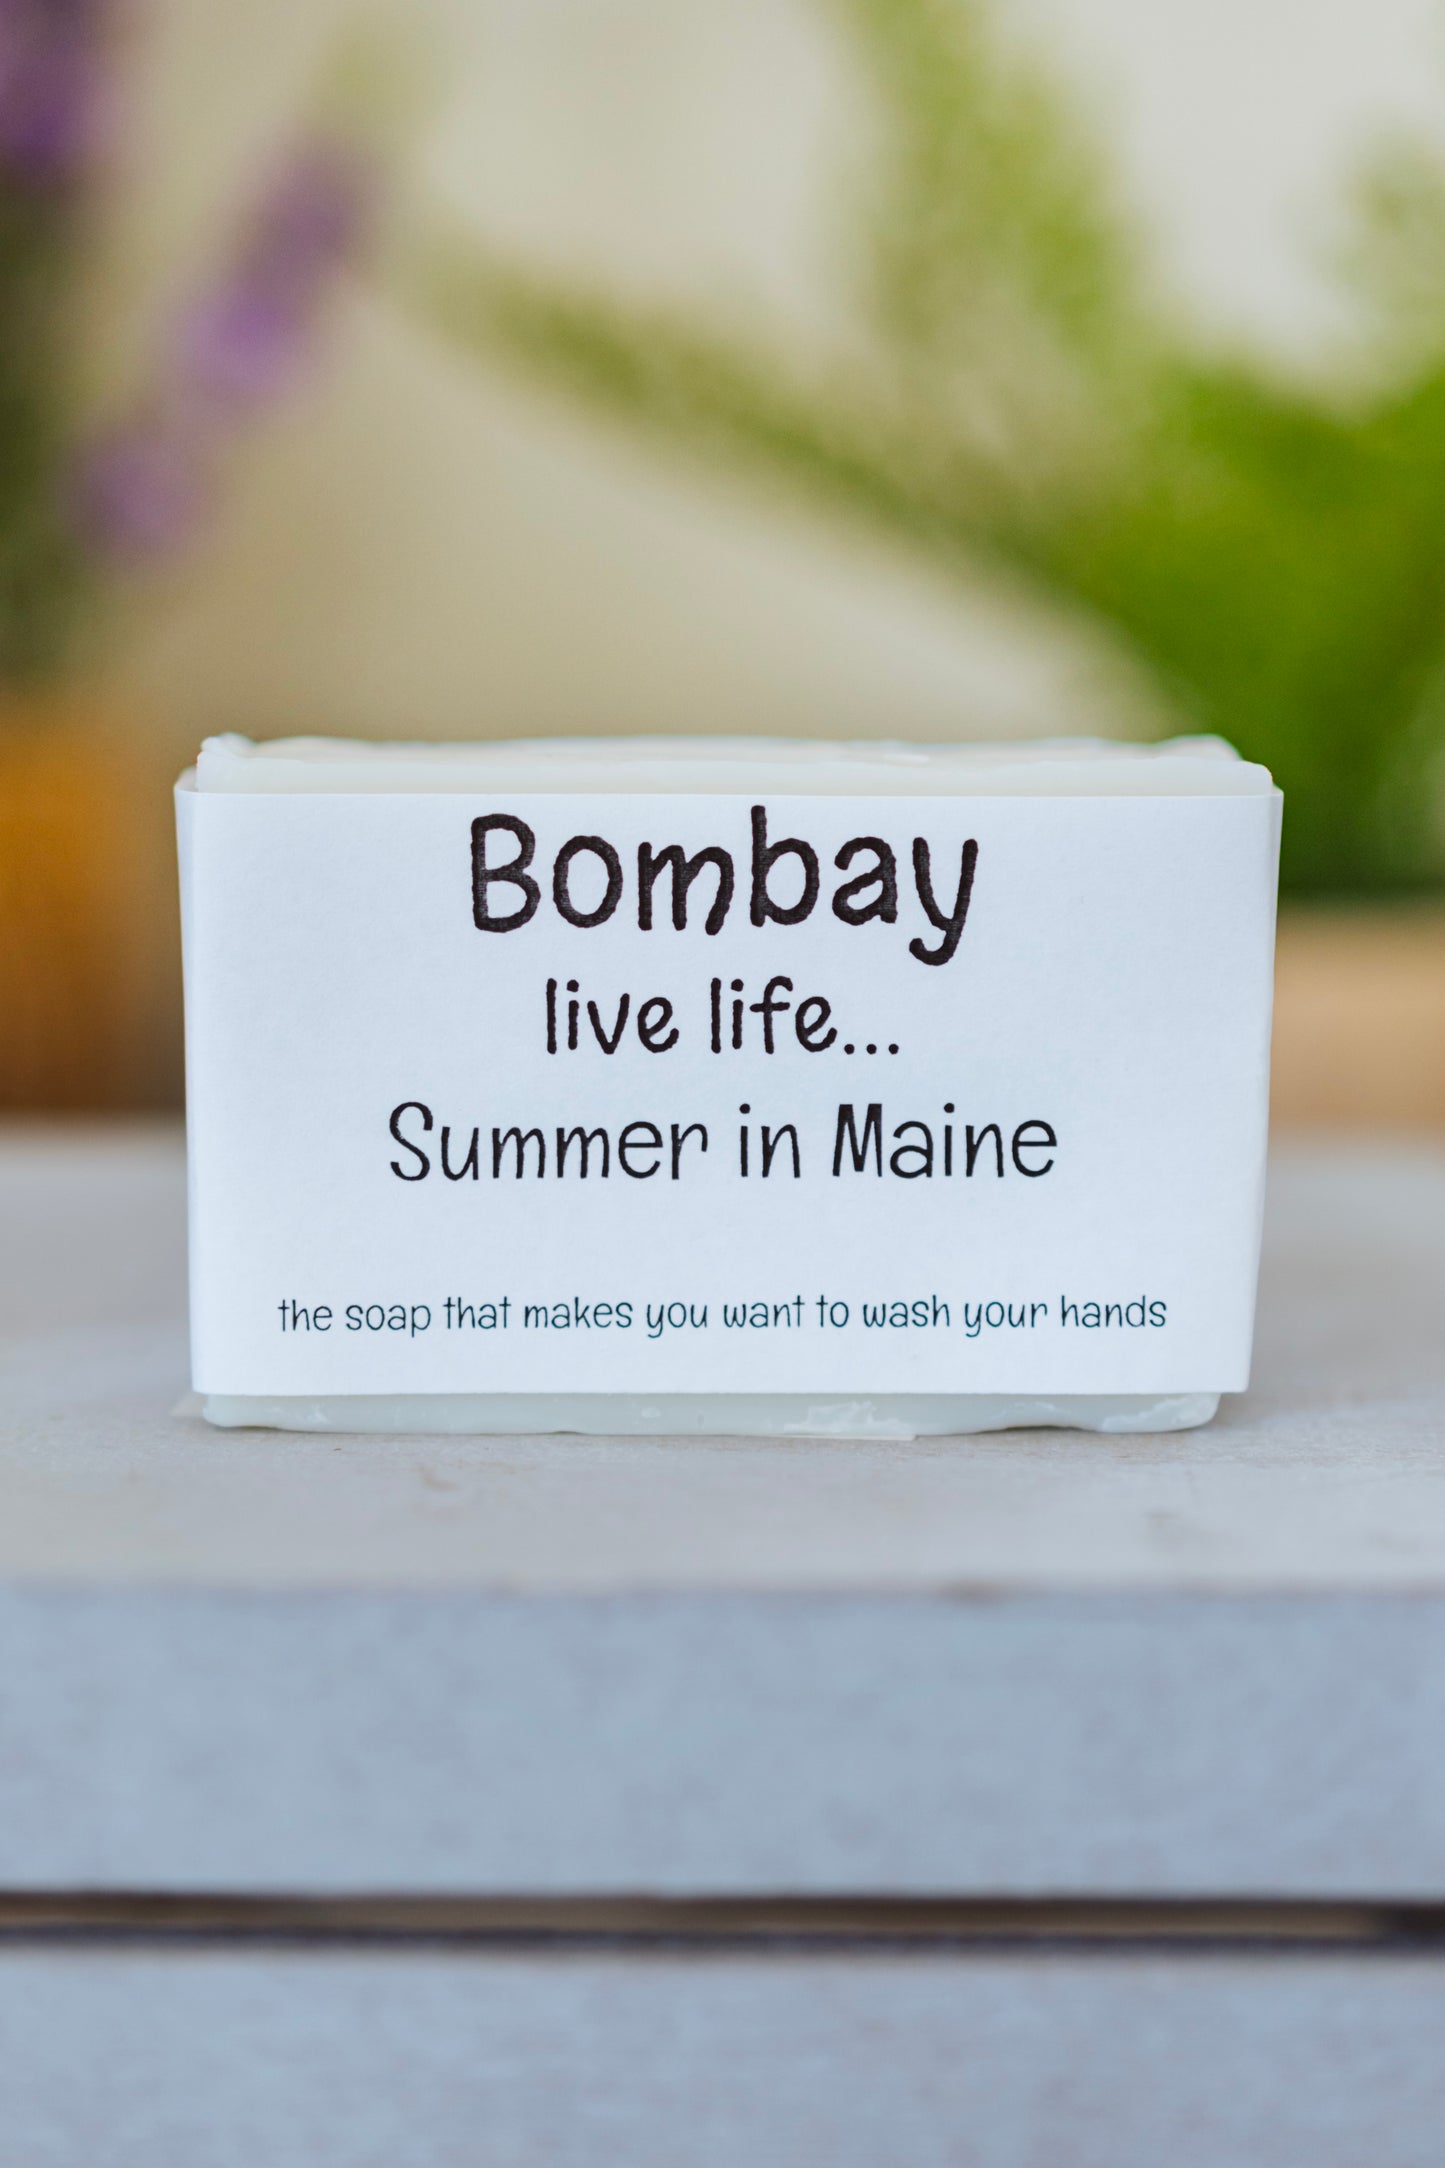 Bombay Specialty Soap: Summer in Maine